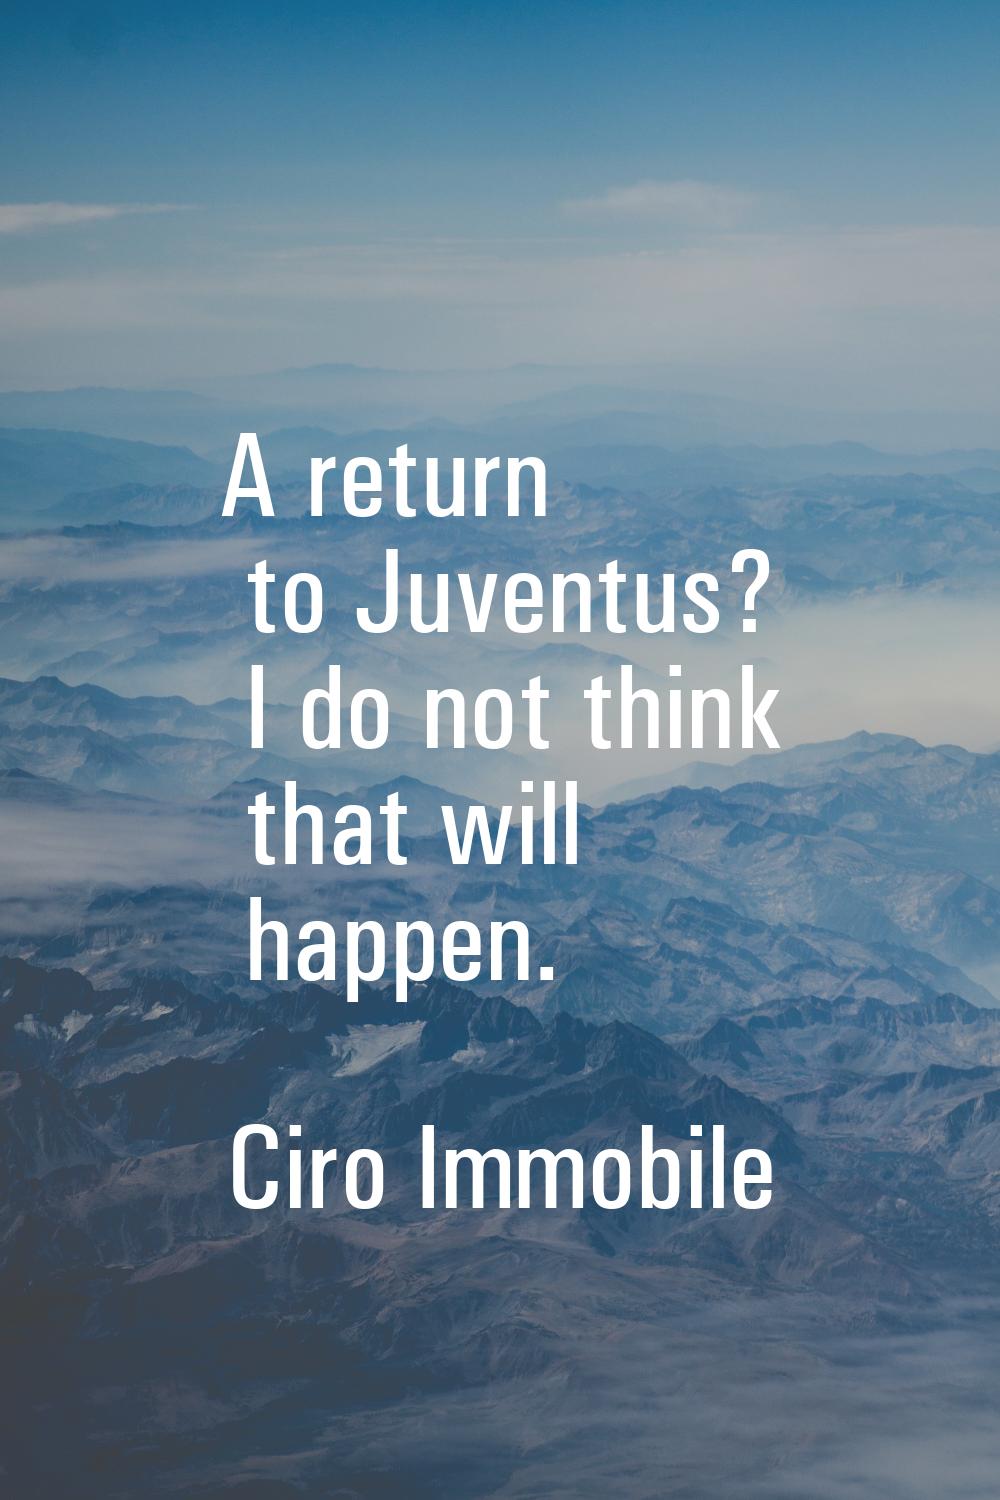 A return to Juventus? I do not think that will happen.